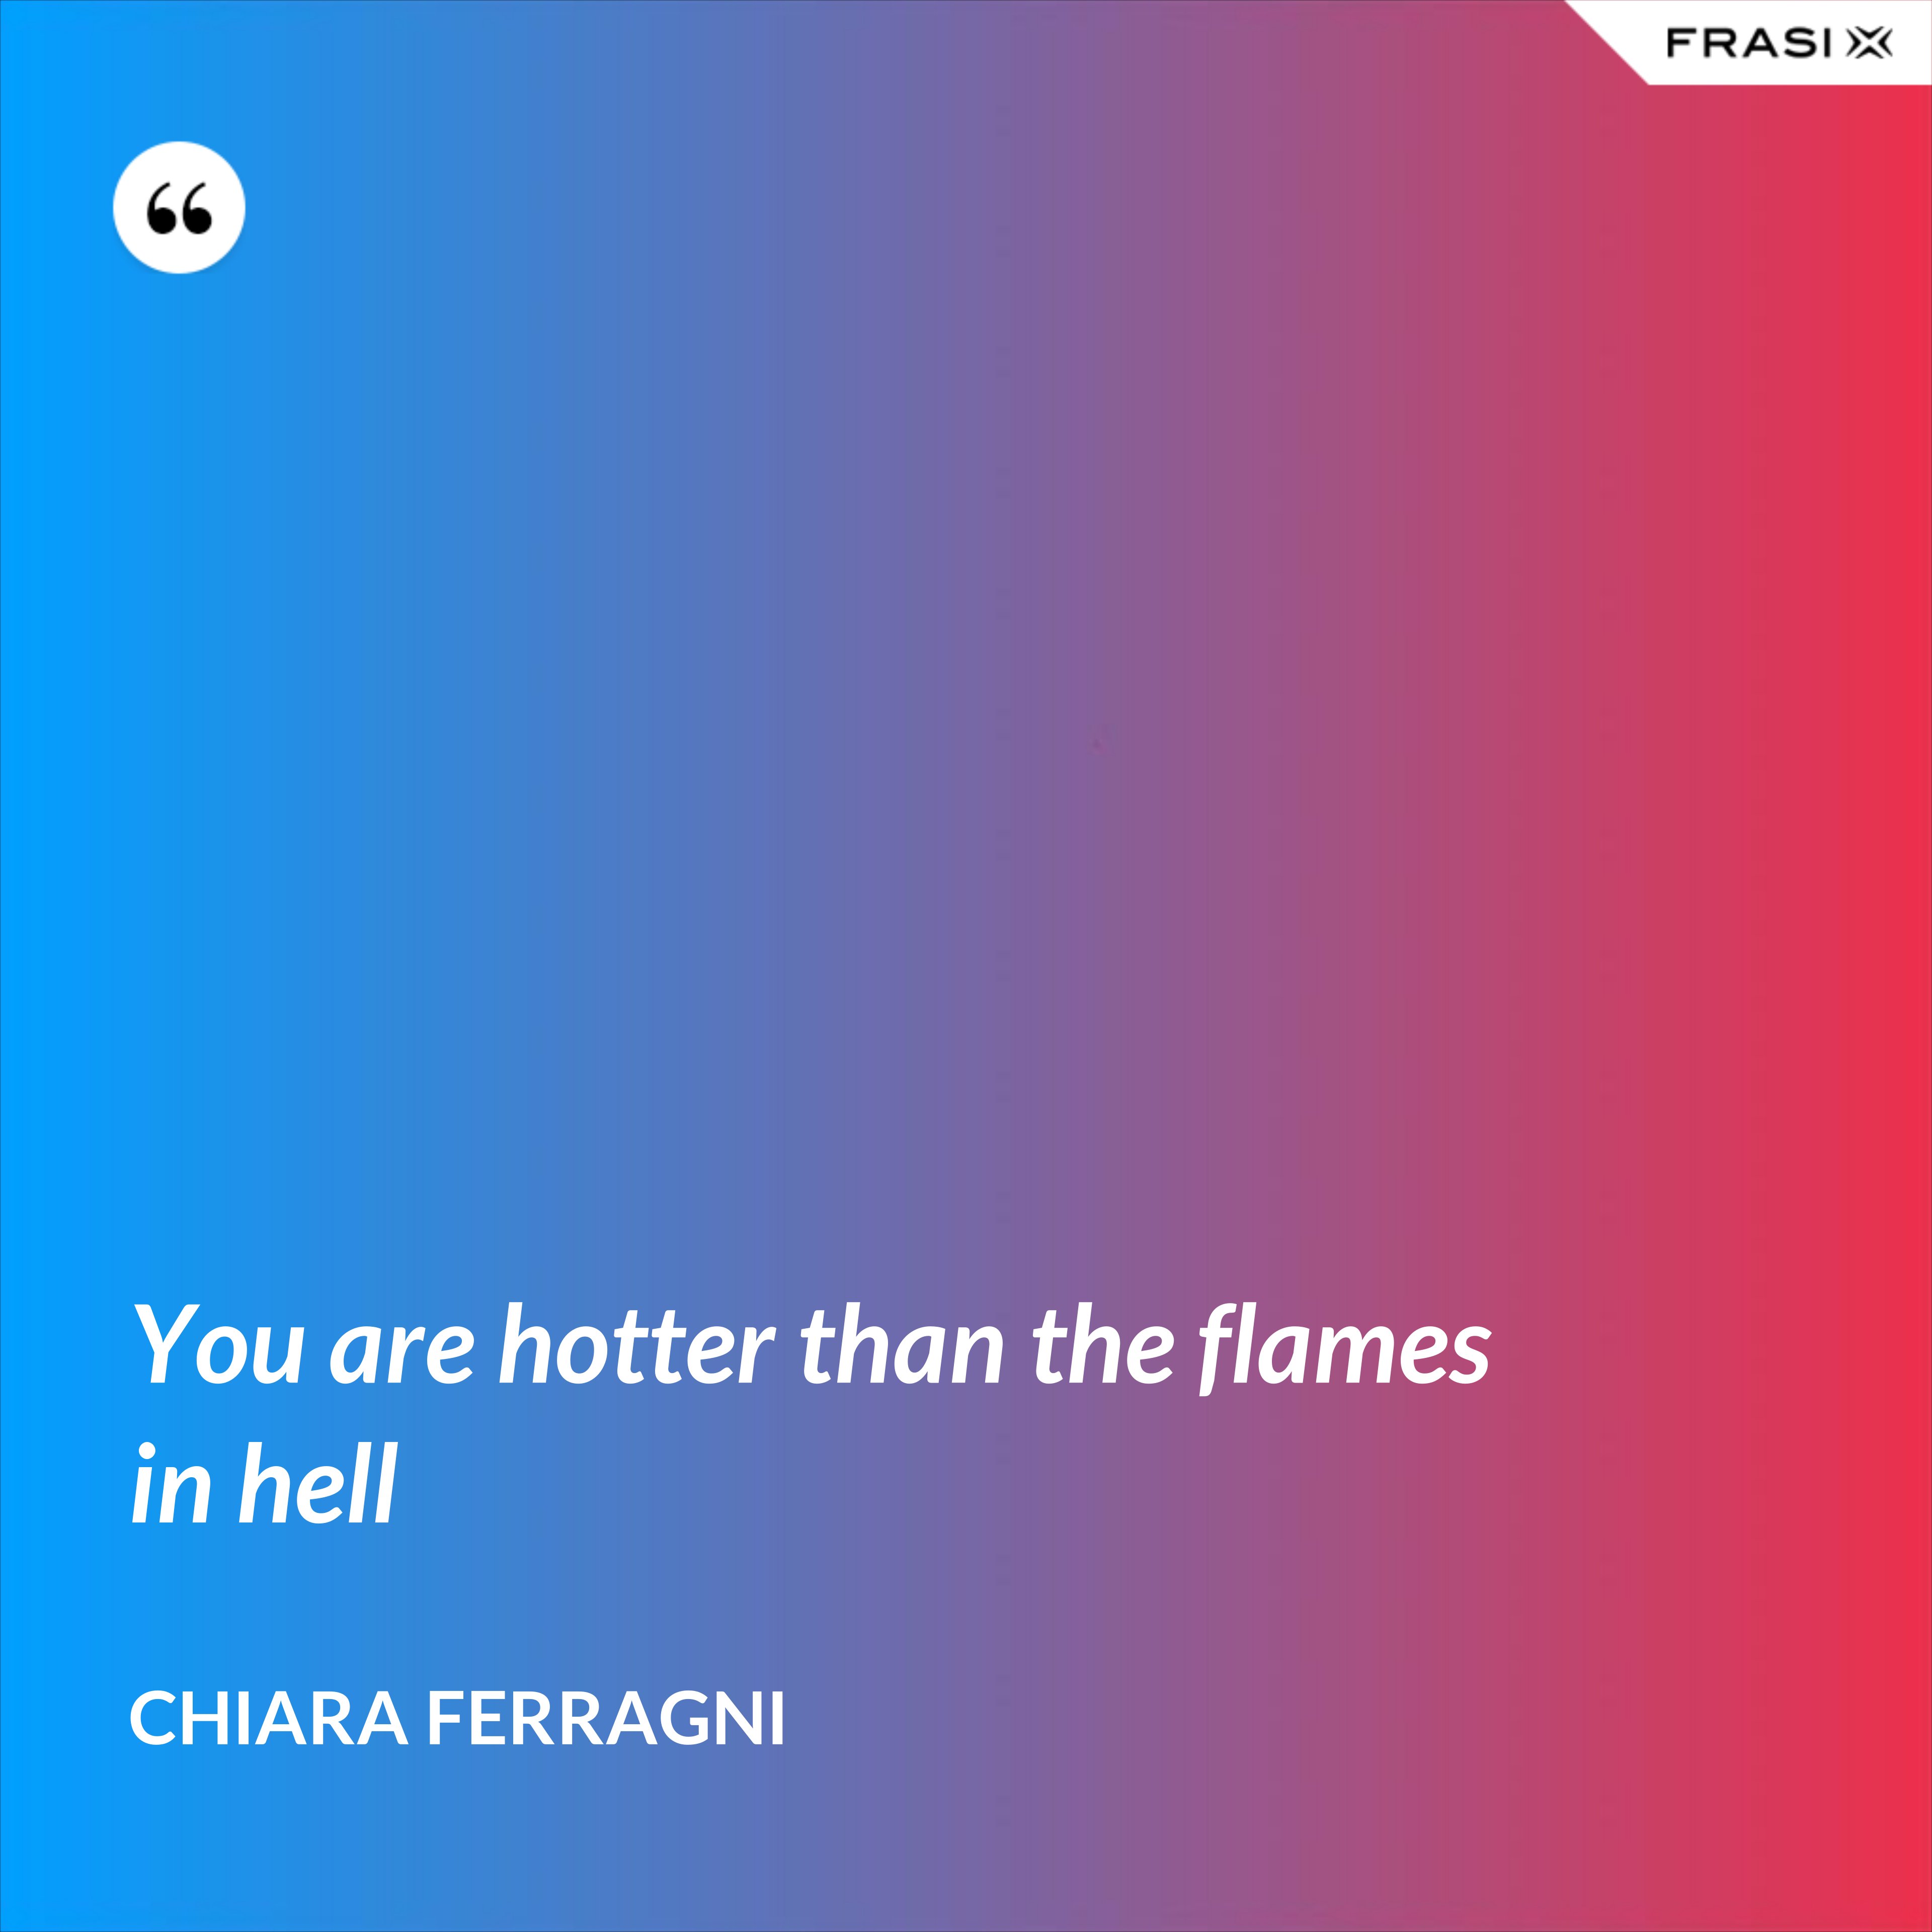 You are hotter than the flames in hell - Chiara Ferragni